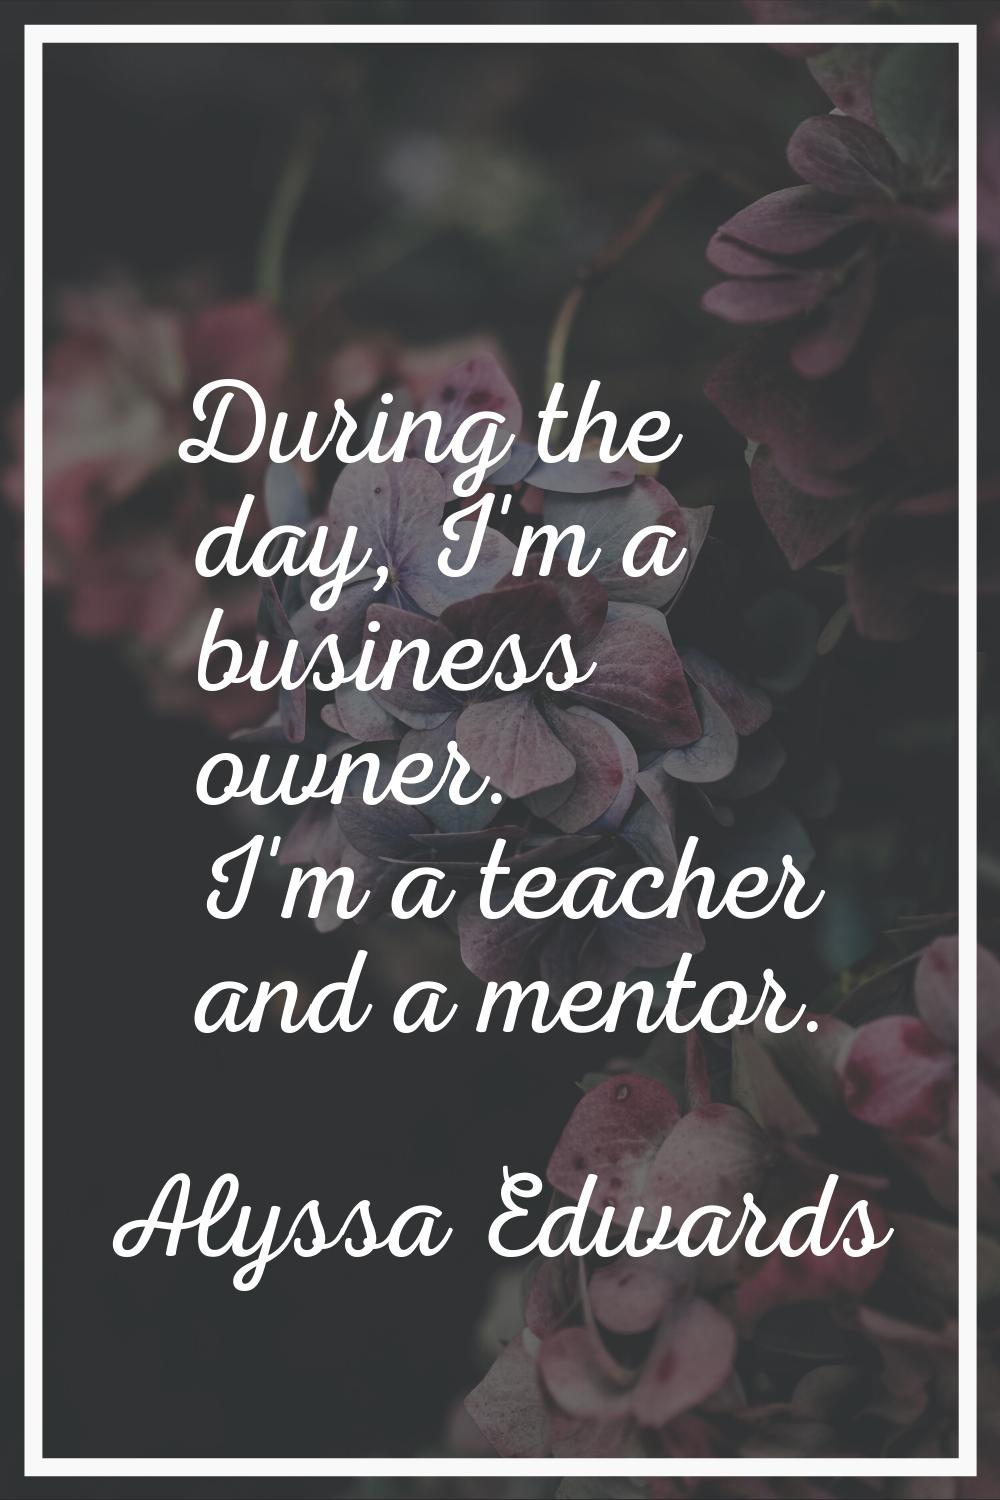 During the day, I'm a business owner. I'm a teacher and a mentor.